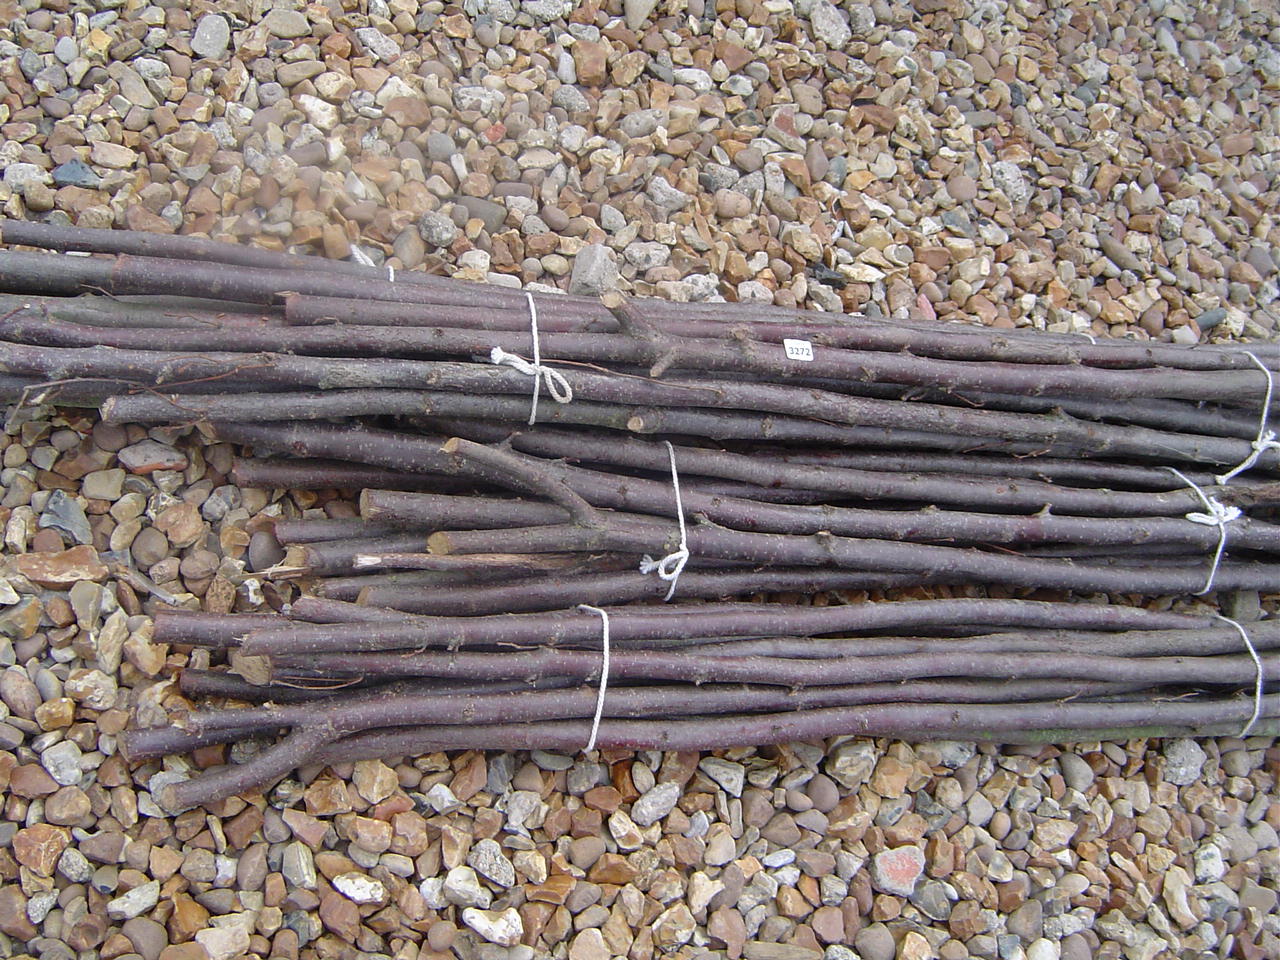 Pile Of Sticks To A Box Of Childs Plastic